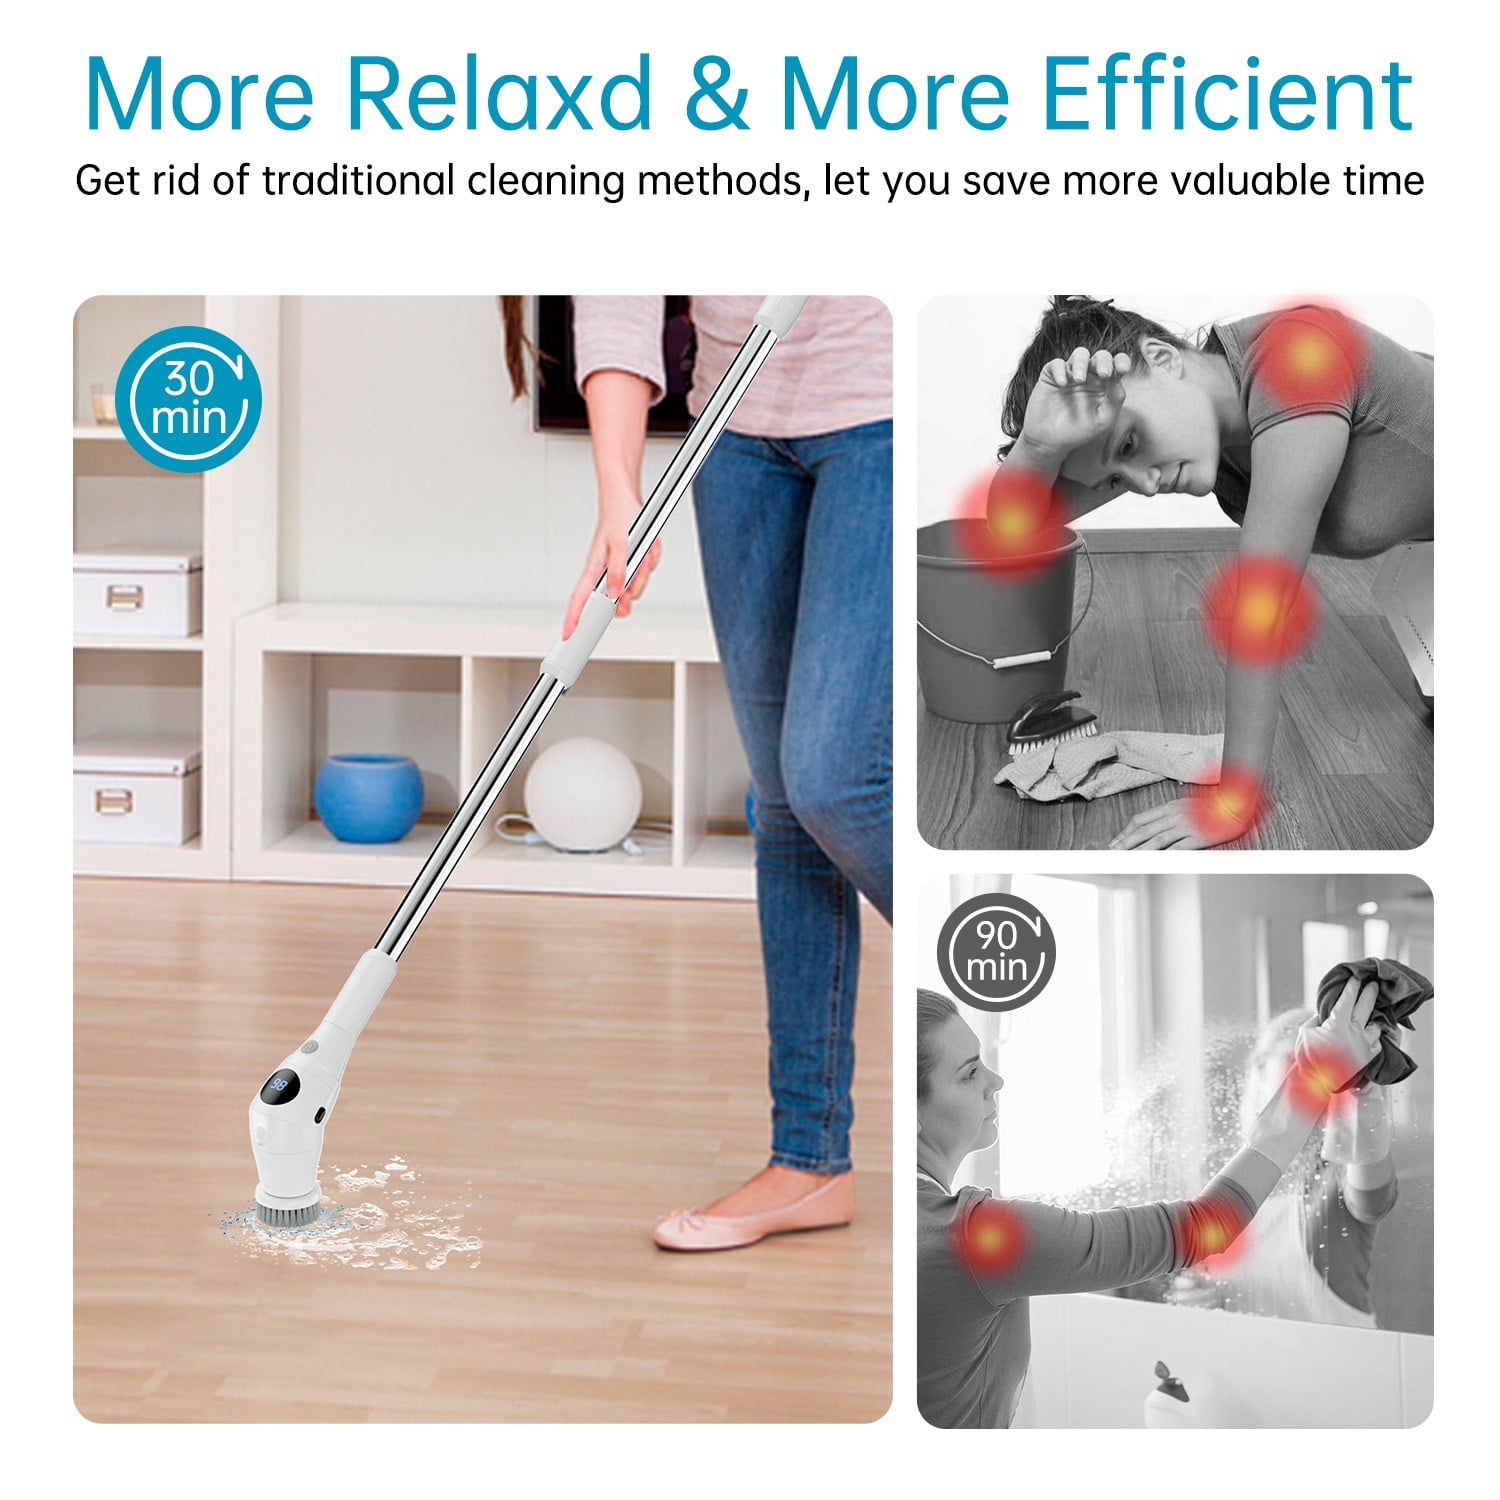 This Handy Electric Spin Scrubber Is 43% Off at